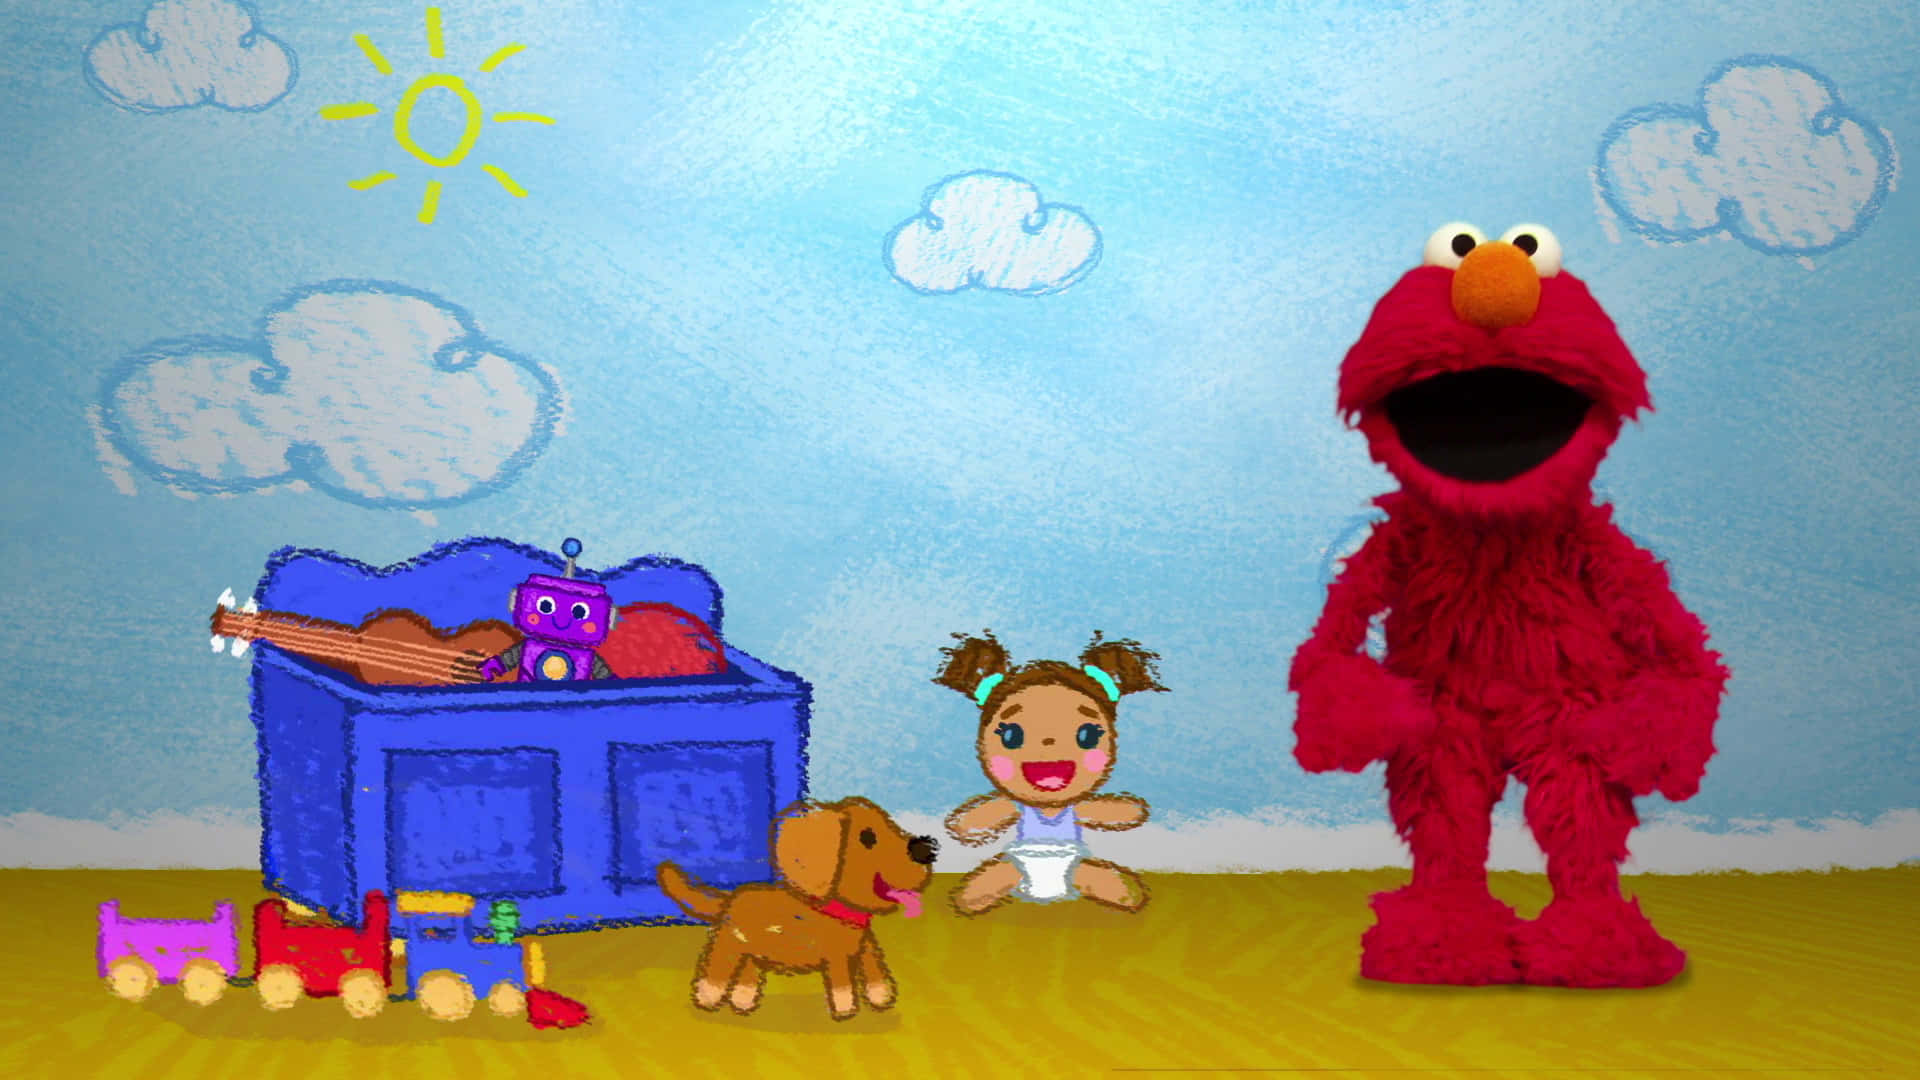 Elmo stands in front of a fun, kid-friendly world